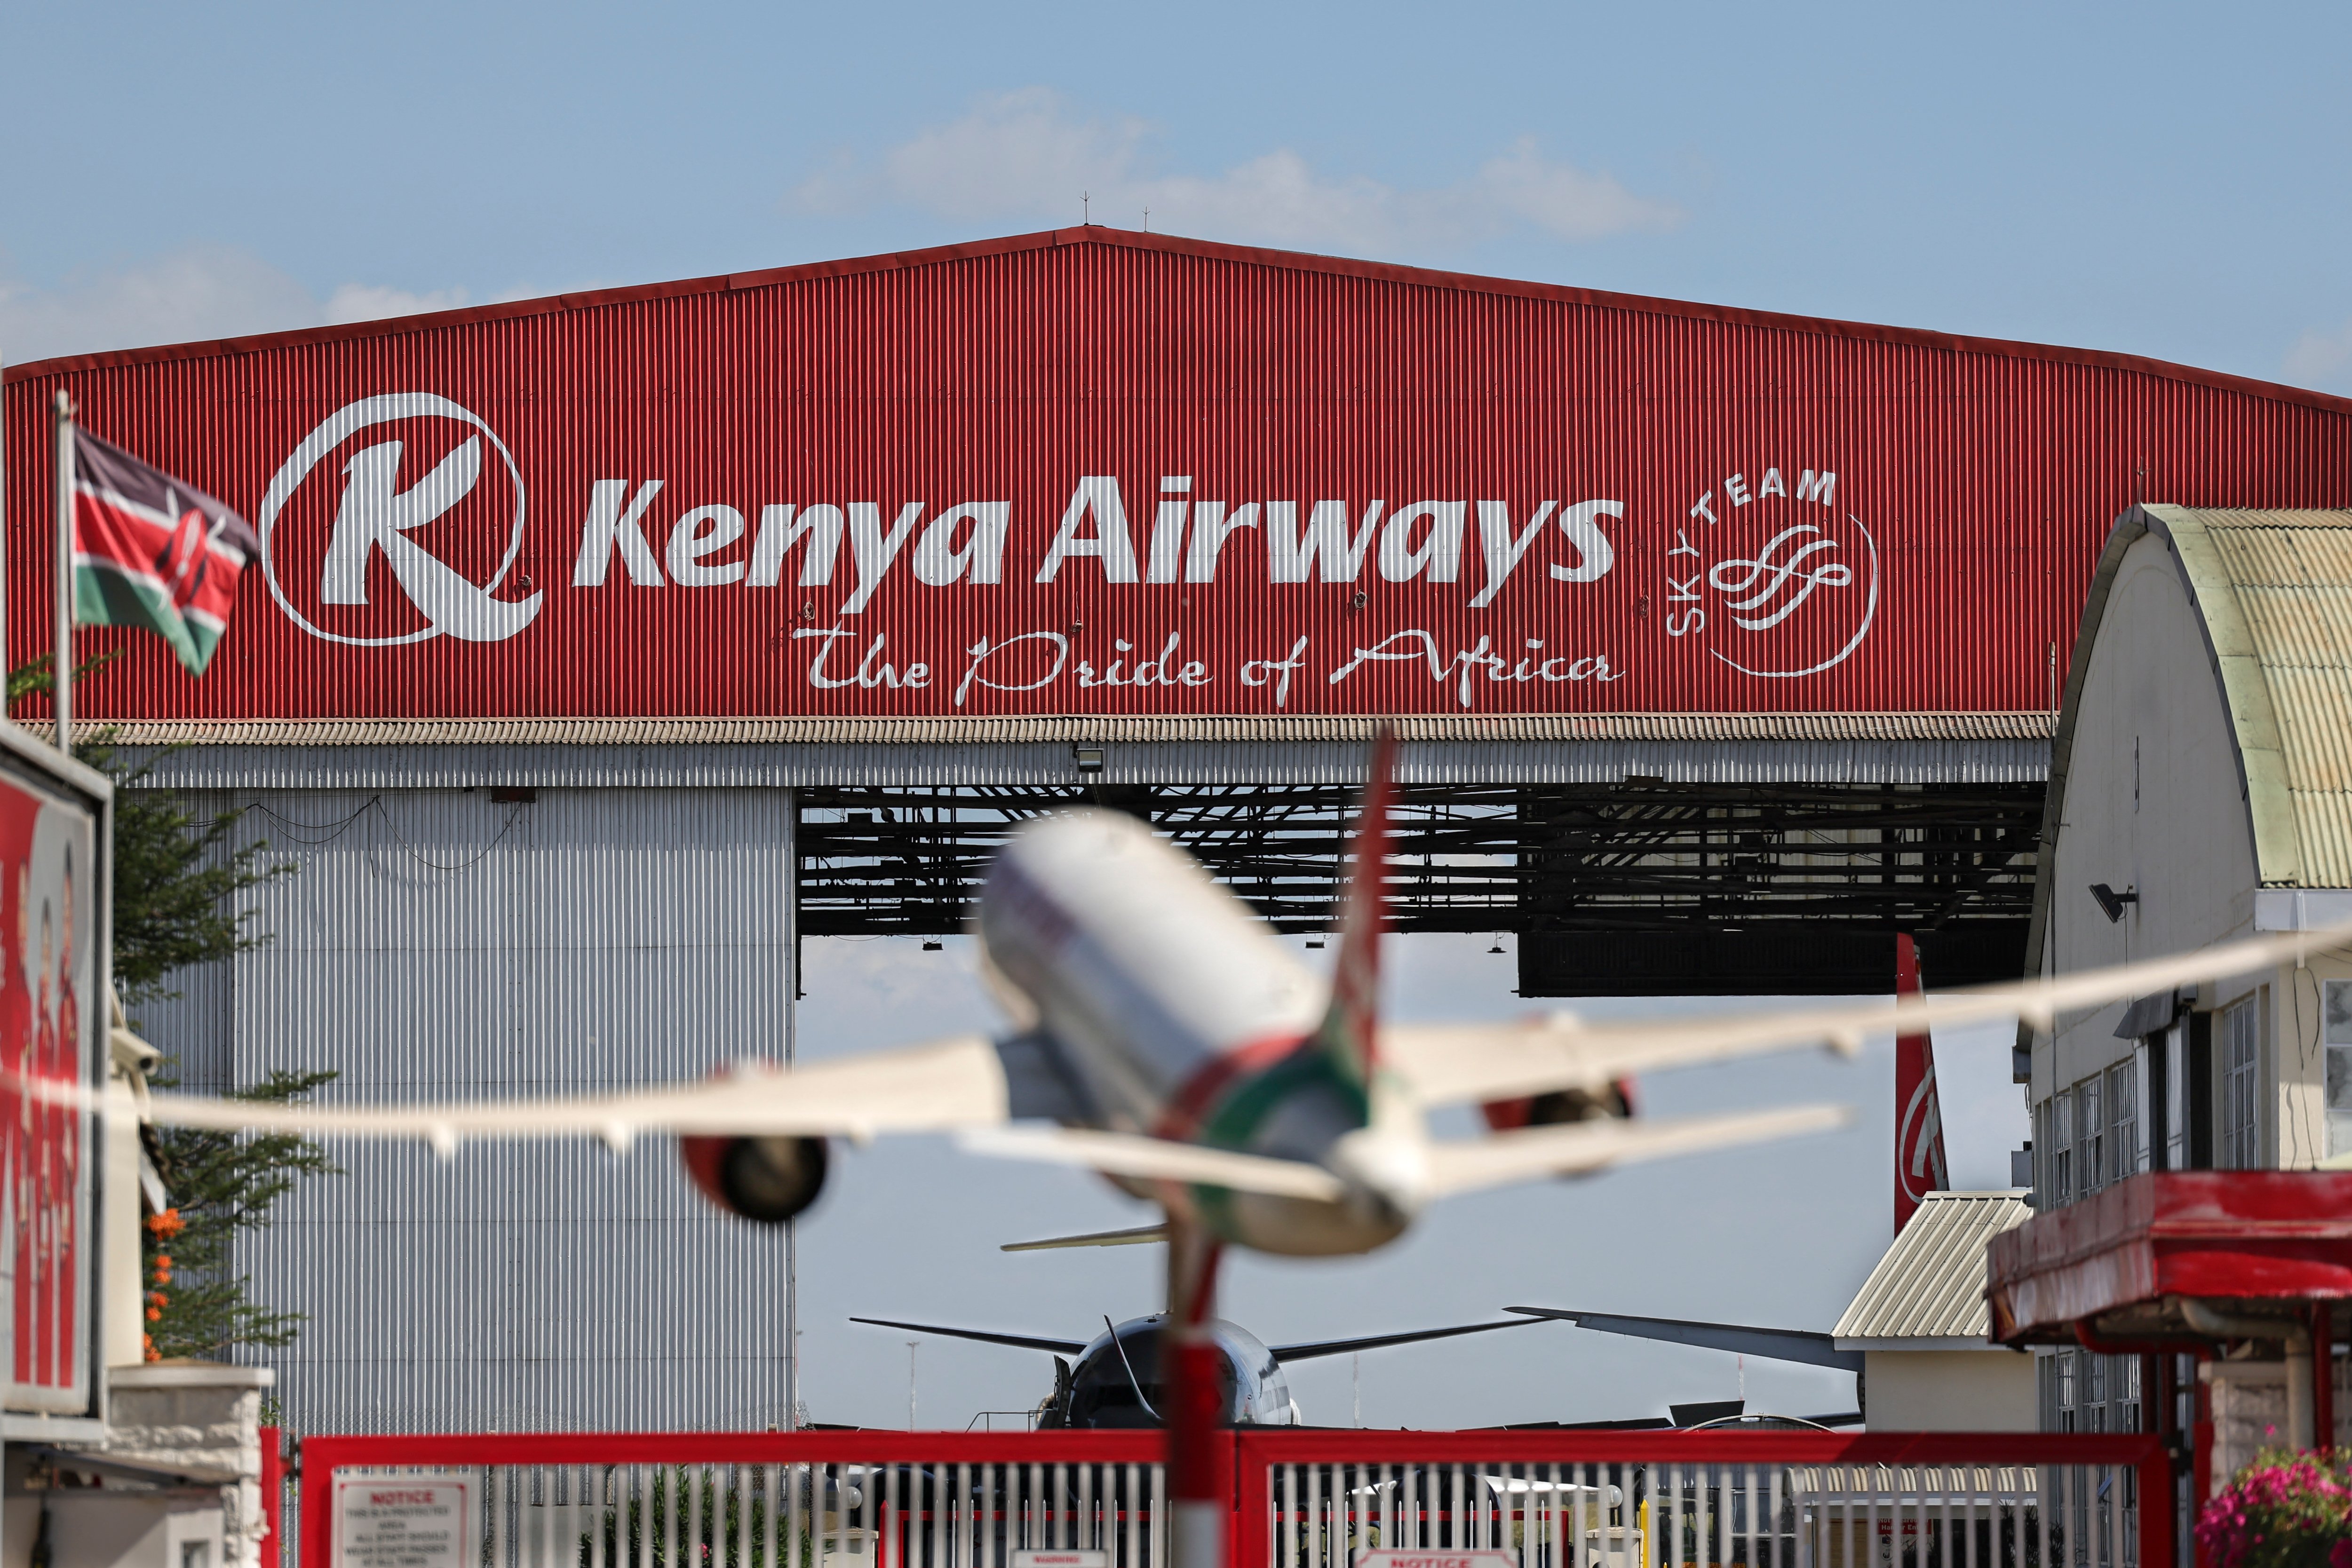 Kenya span class tHighlight Airways span propelled by first operating profit in years